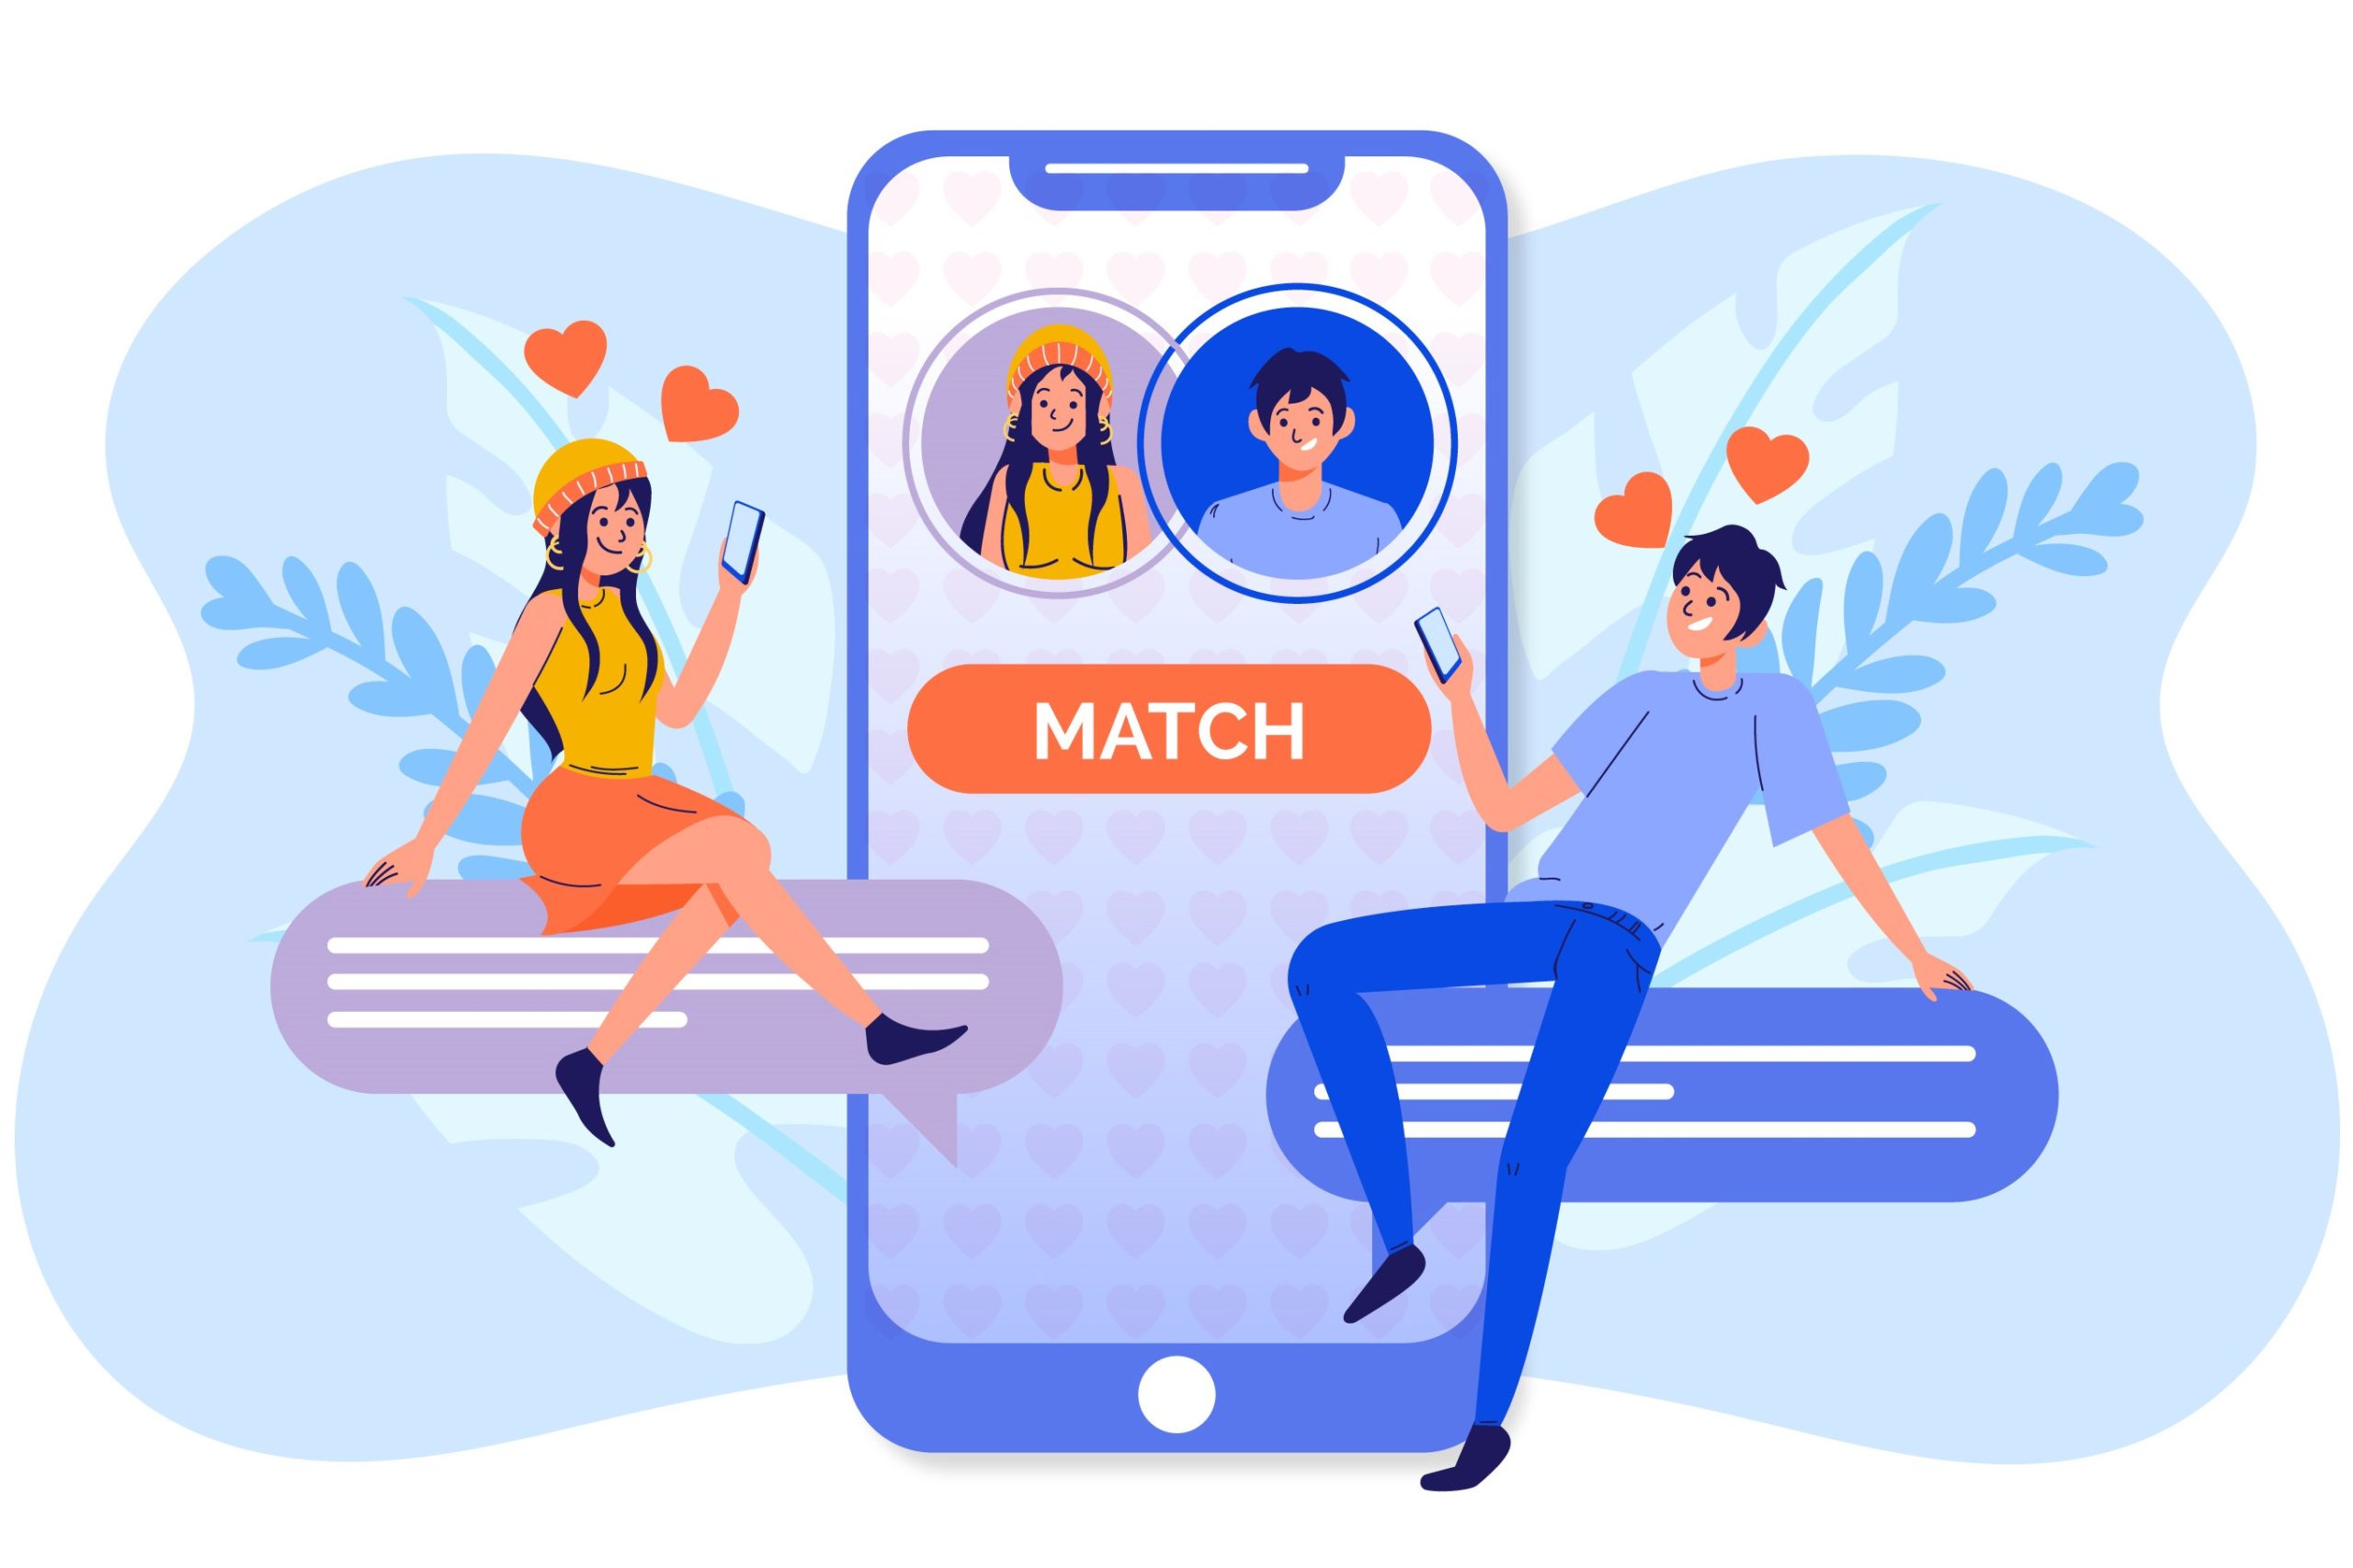 Tinder uses AI to find a match.